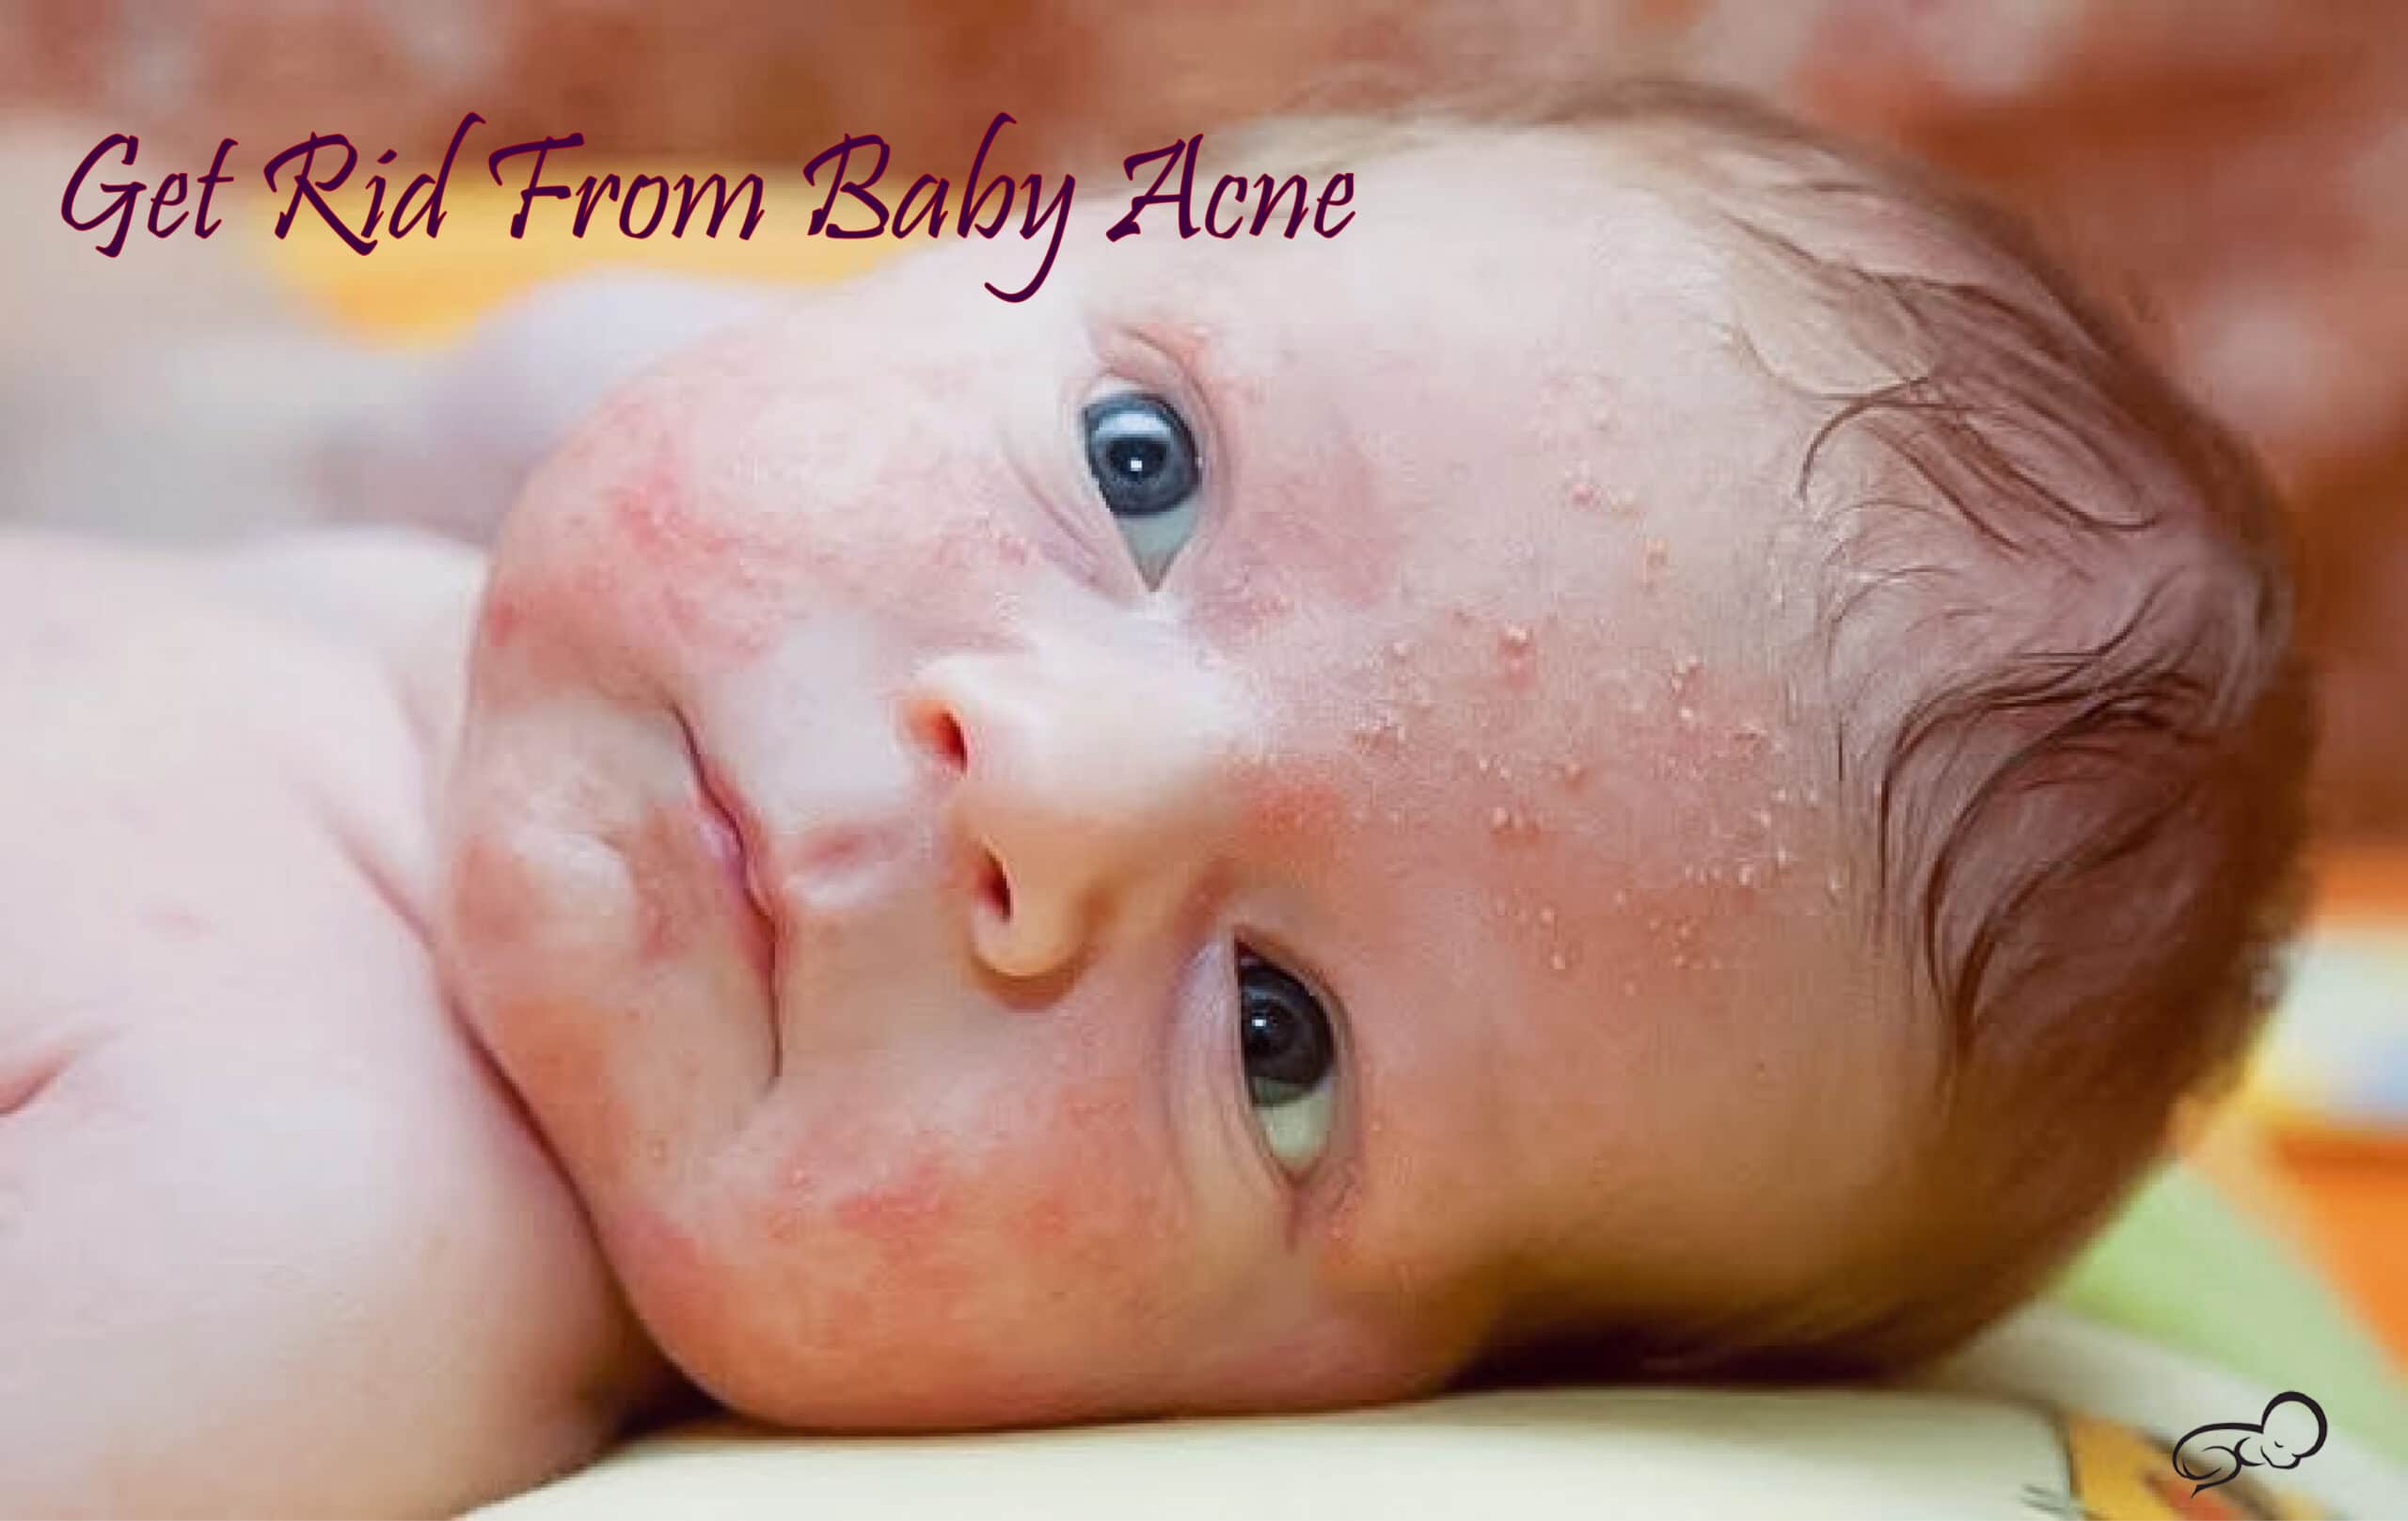 Baby Bumps On Face? How To Get Rid of Baby Acne